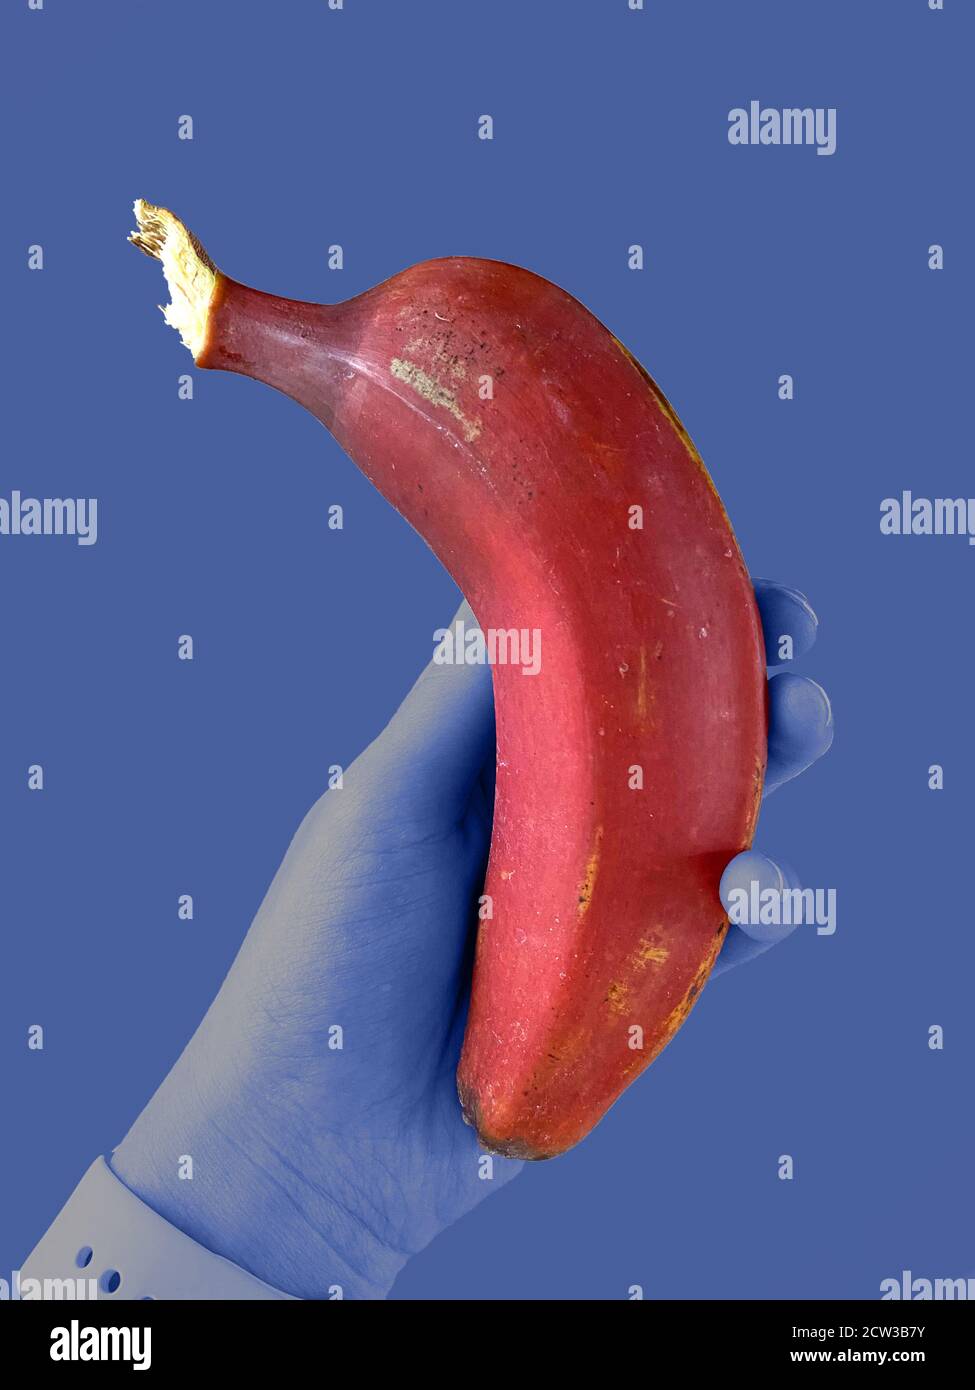 Isolated red banana being hold in hand on a dark blue background Stock Photo